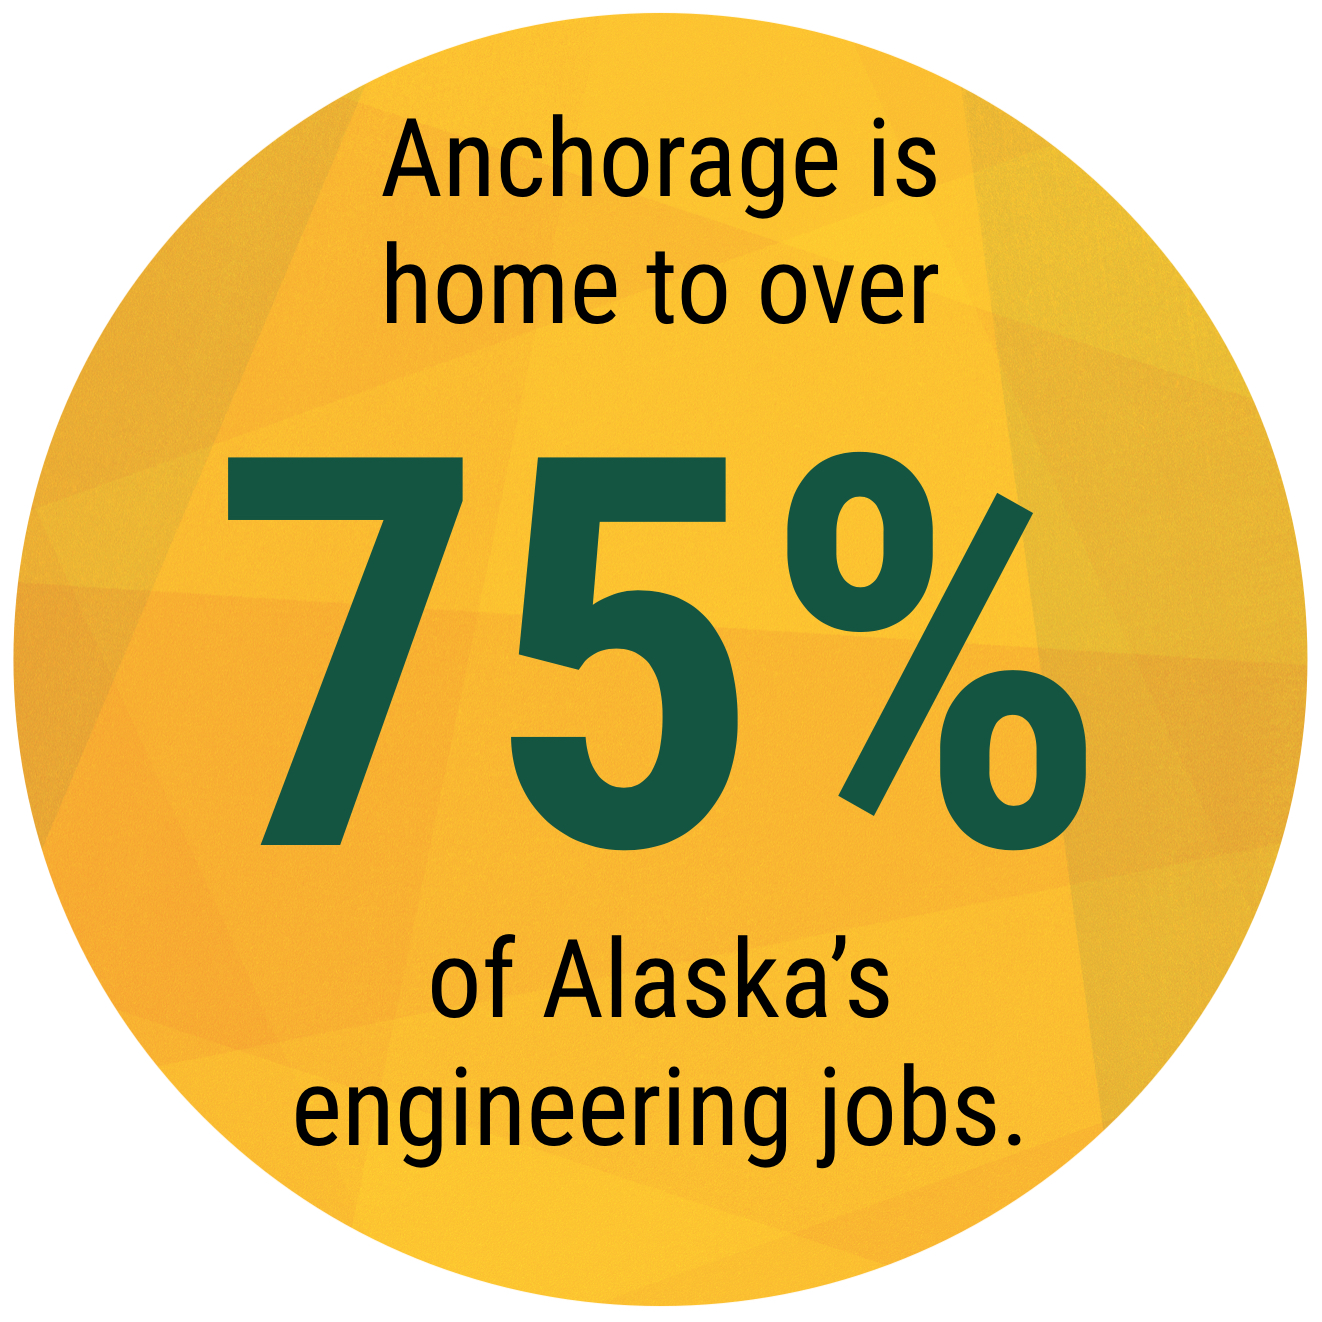 Data Bubble, "Anchorage is home to over 75% of Alaska's engineering jobs."